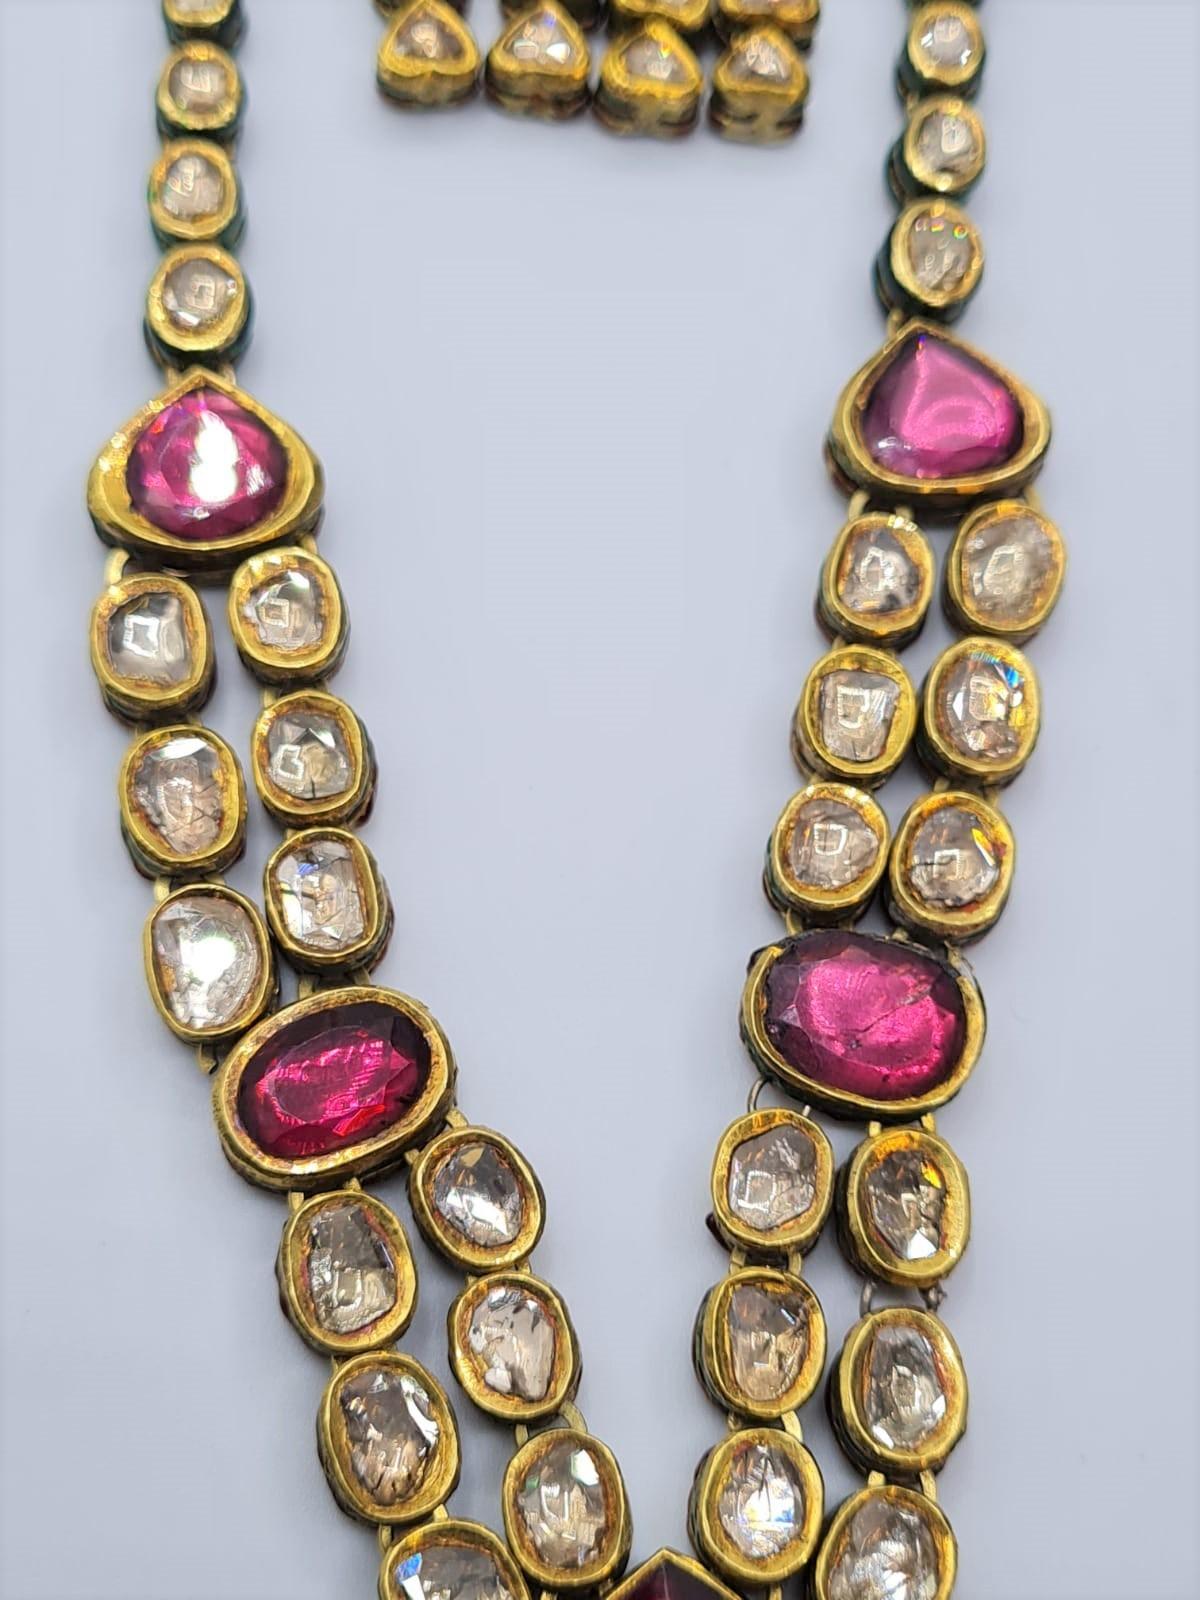 An antique handmade and decorated ruby and diamond necklace 1 cracked stone with matching earrings - Image 3 of 8